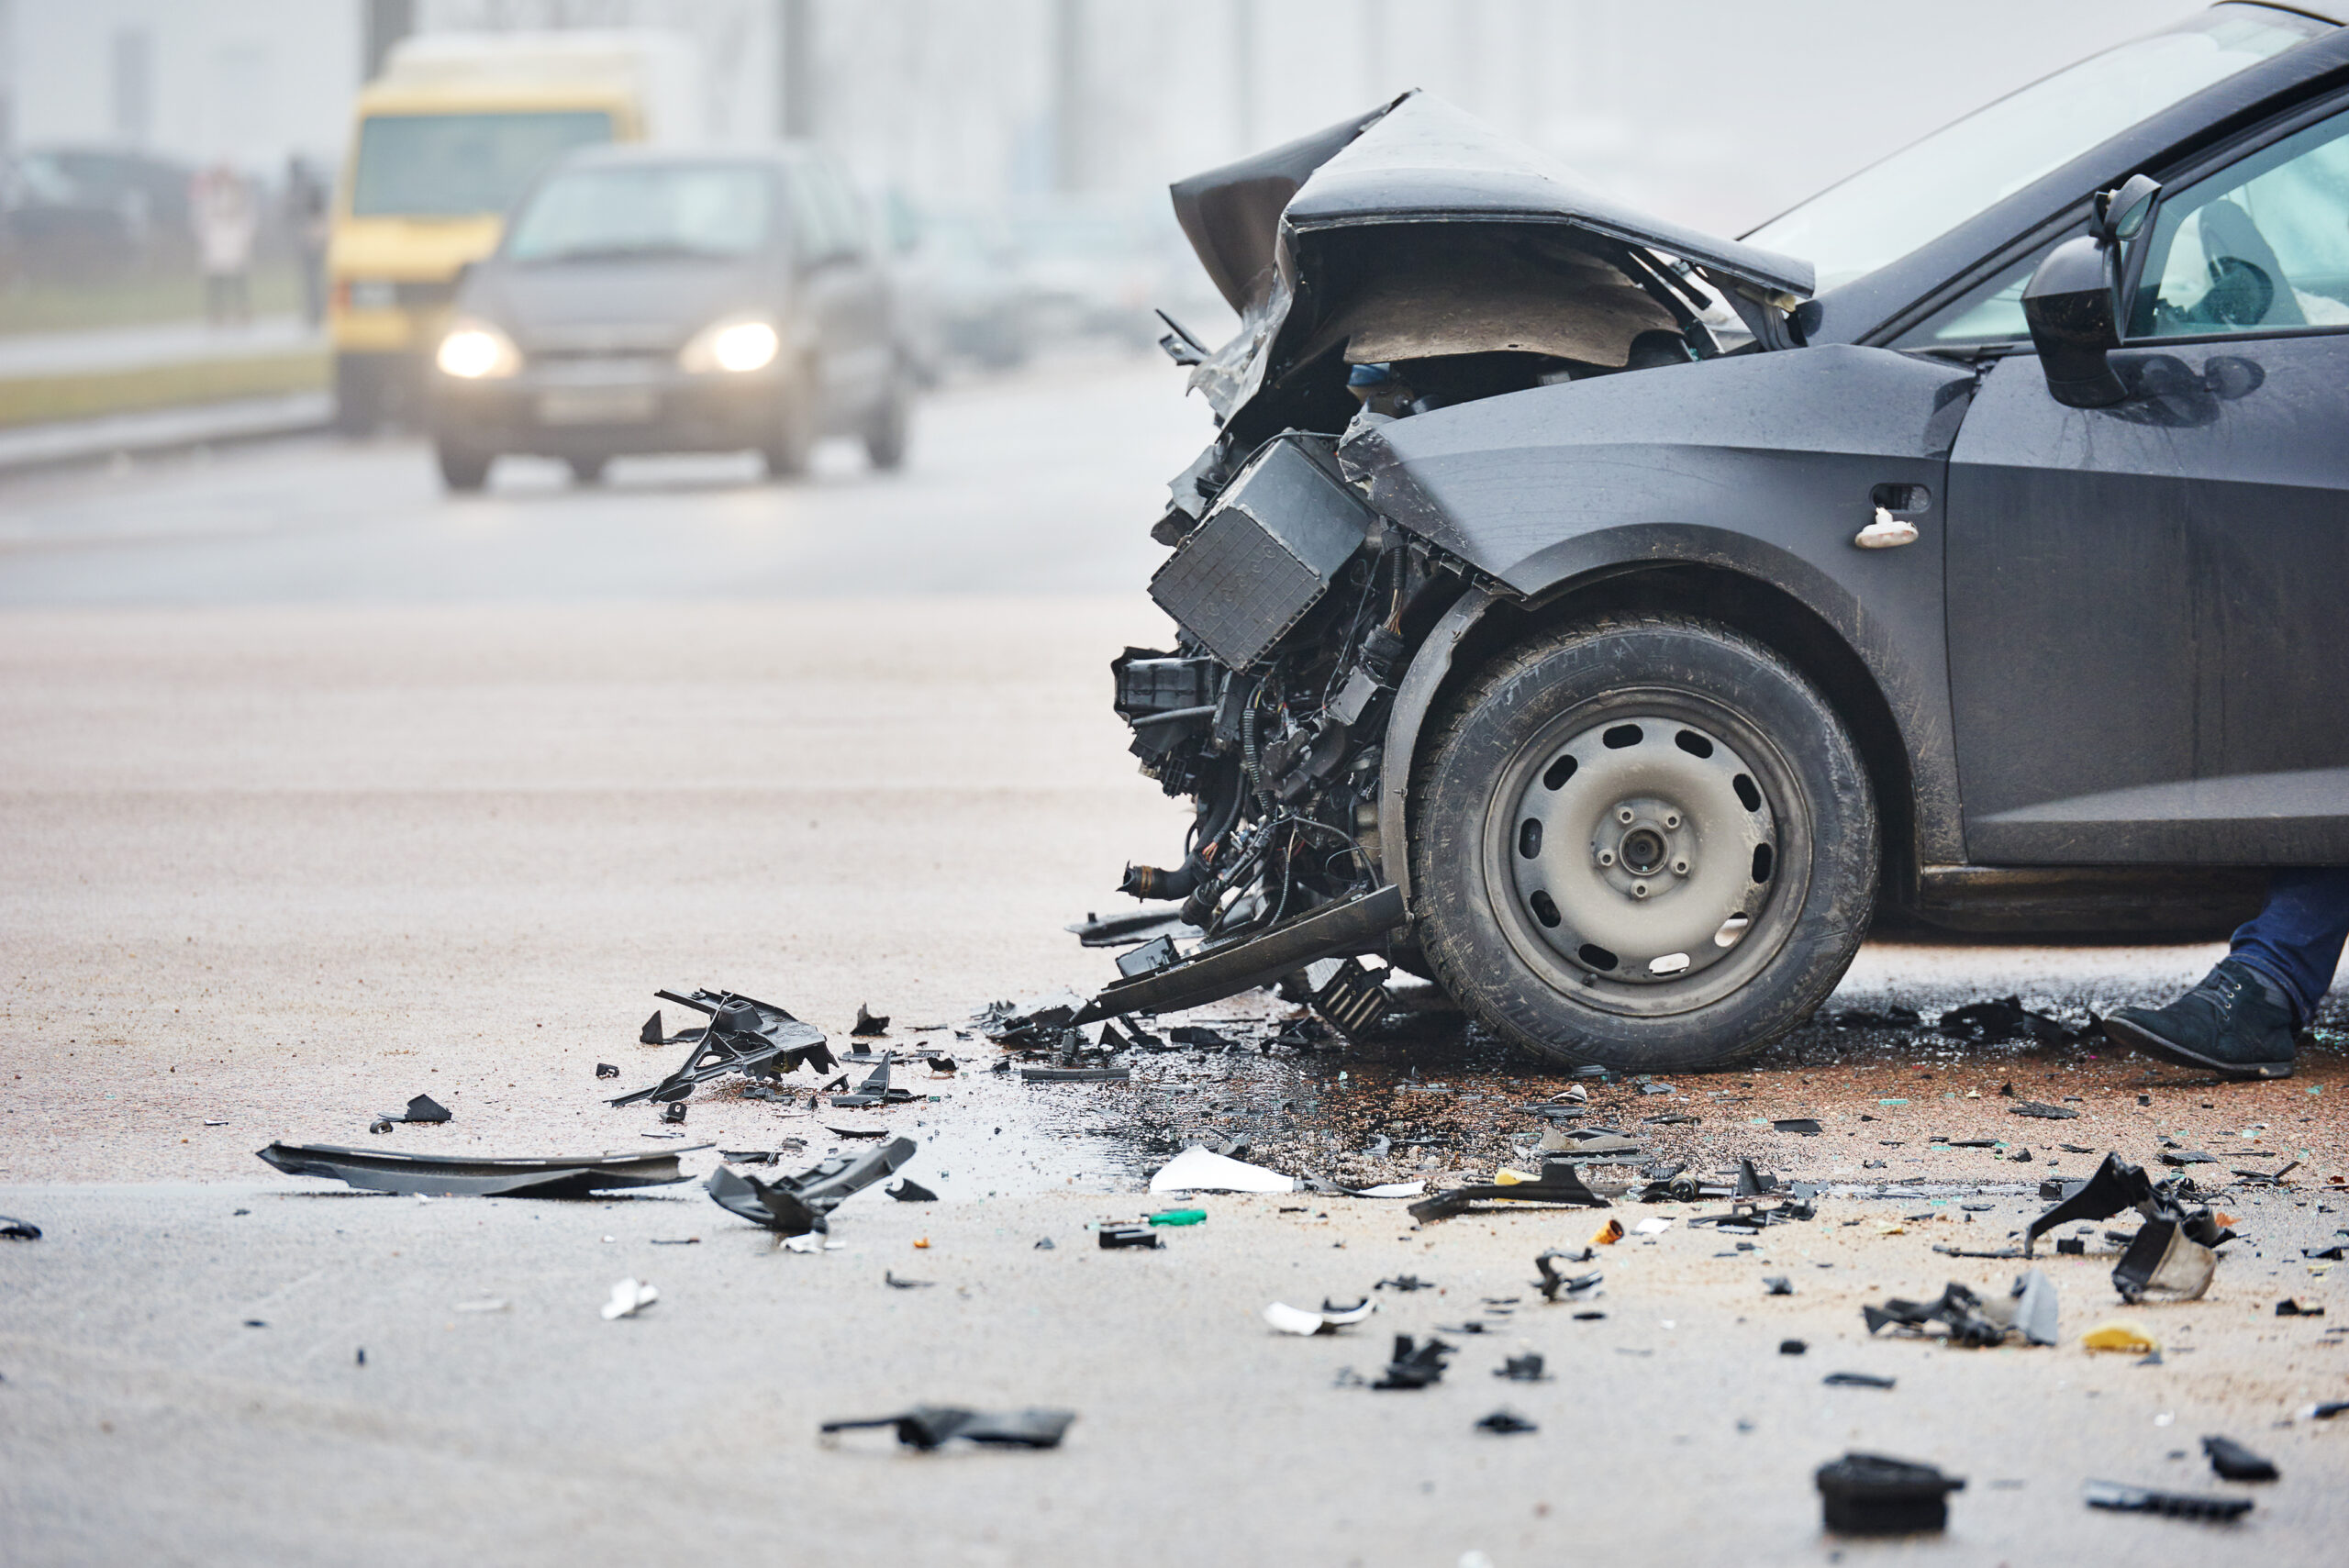 Steps To Take If You Are Injured In An Accident Caused By An Unsecured Load